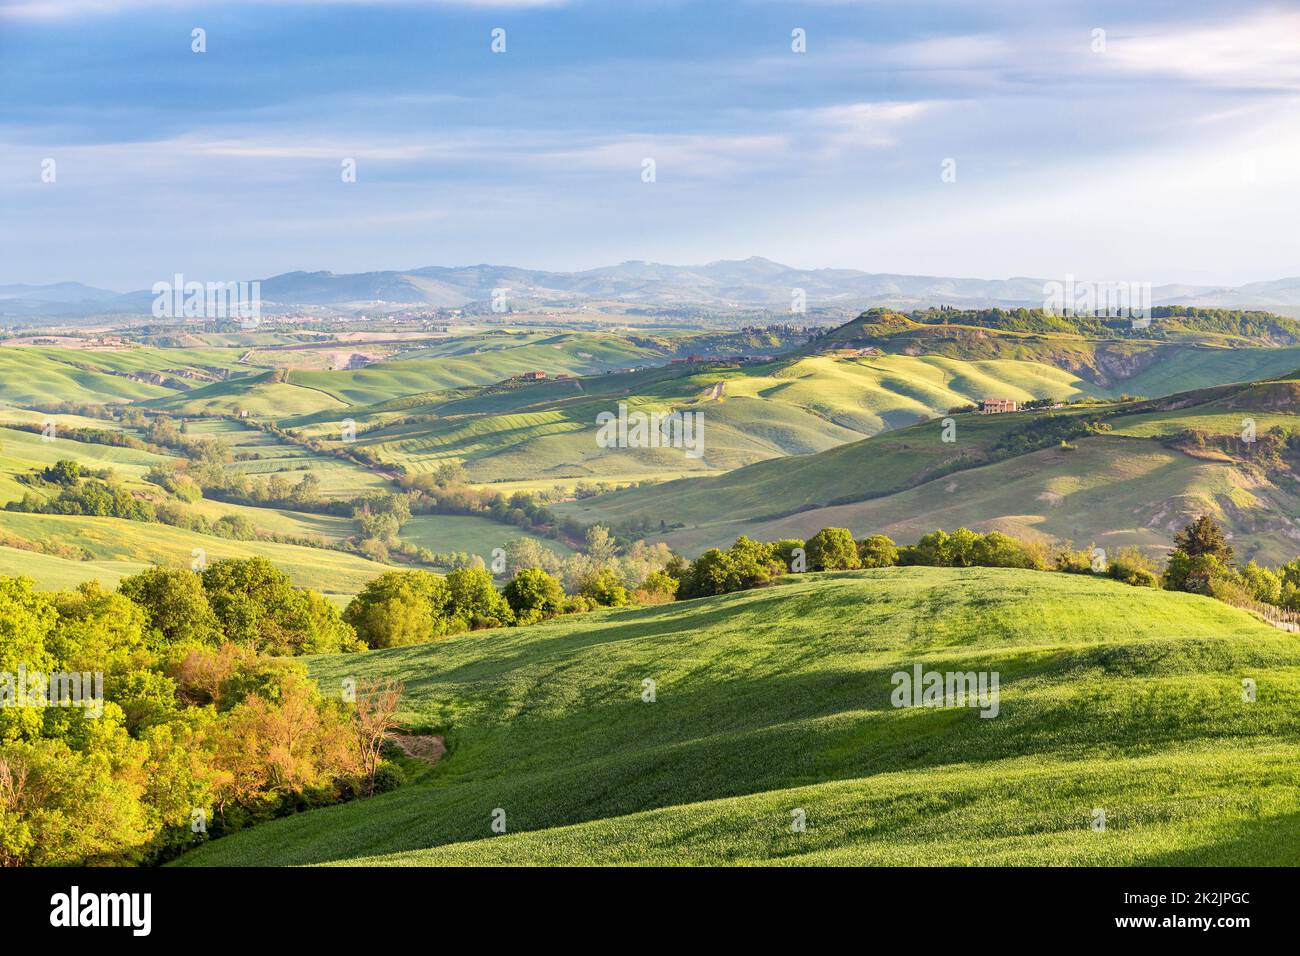 Rural rolling landscape view with fields and groves of trees in a valley in Tuscany Stock Photo